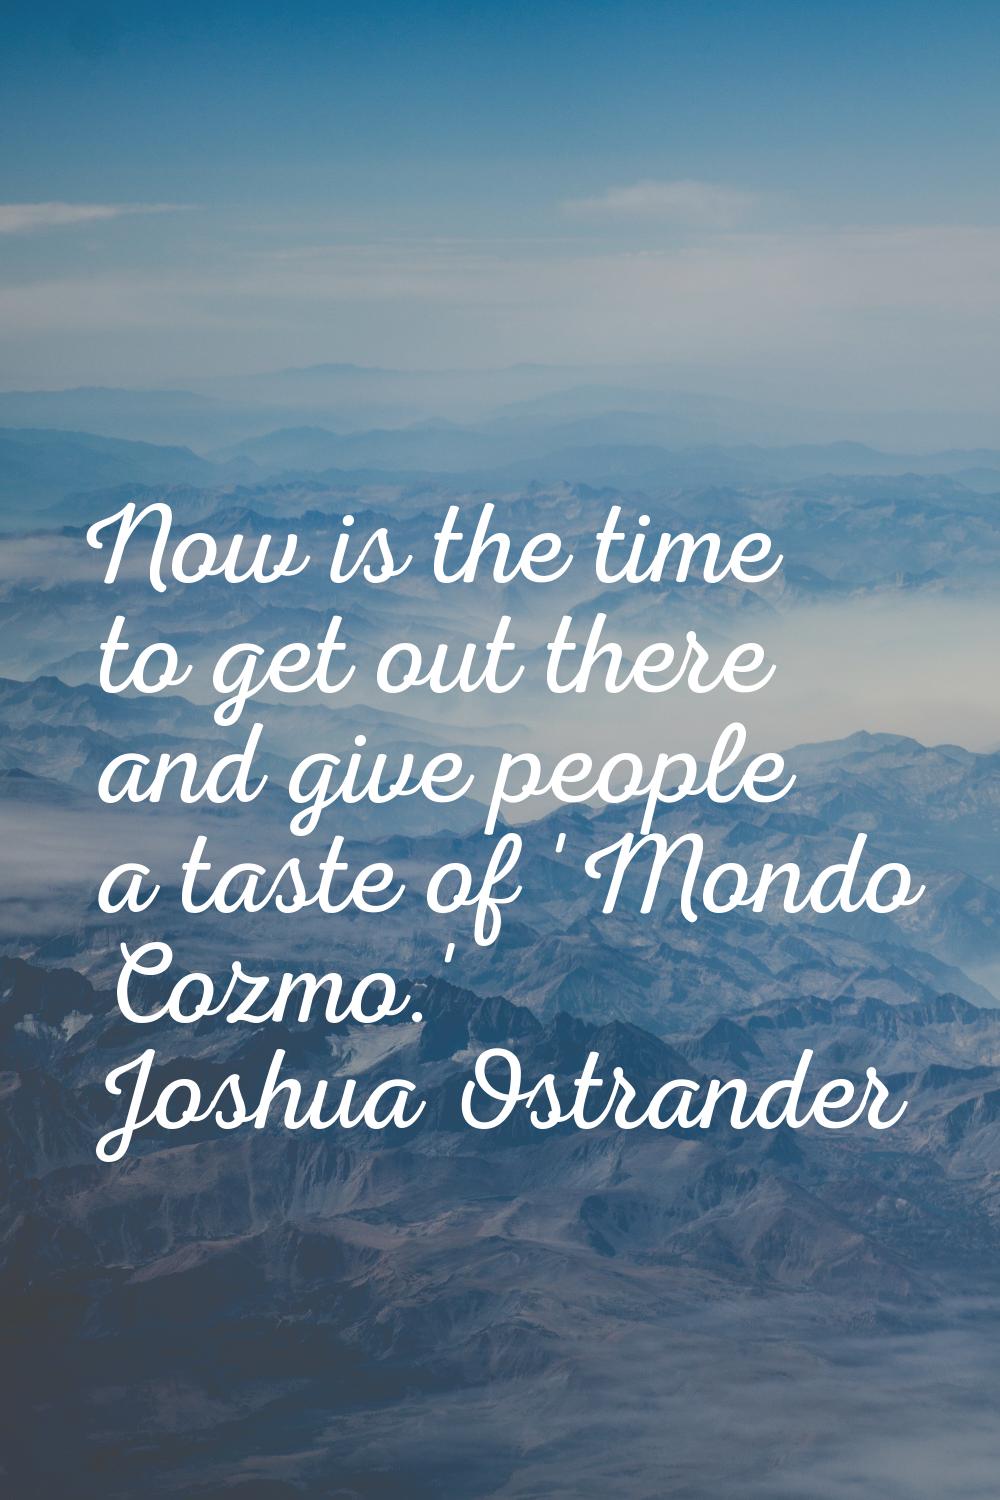 Now is the time to get out there and give people a taste of 'Mondo Cozmo.'